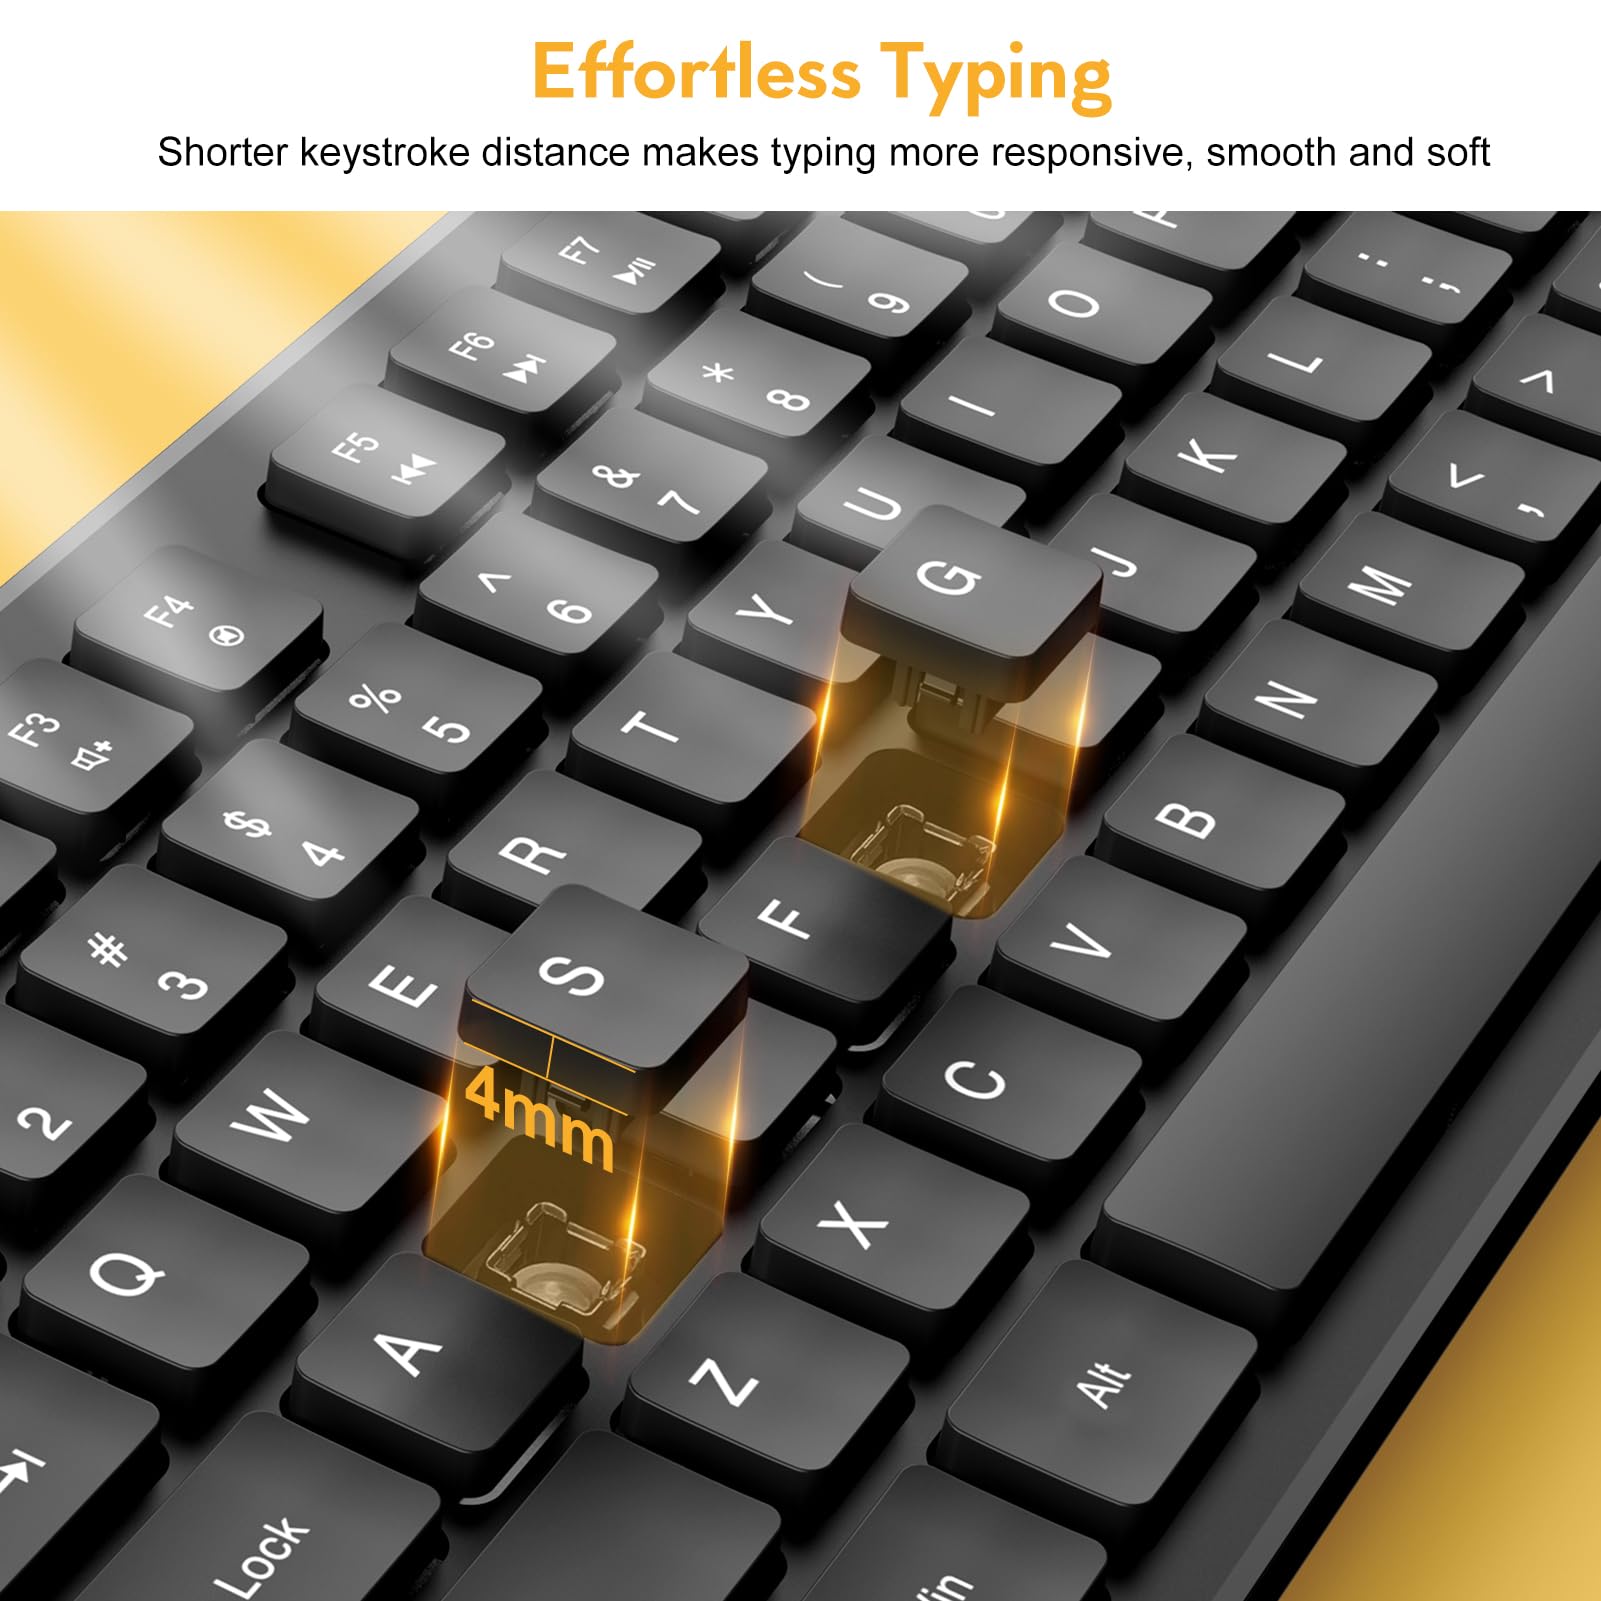 Wireless Keyboard and Mouse, Trueque Silent 2.4GHz Cordless Full Size USB Mouse Combo, Long Battery Life, Lag-Free for Computer, Laptop, PC, Windows, Mac, Chrome OS (Black)